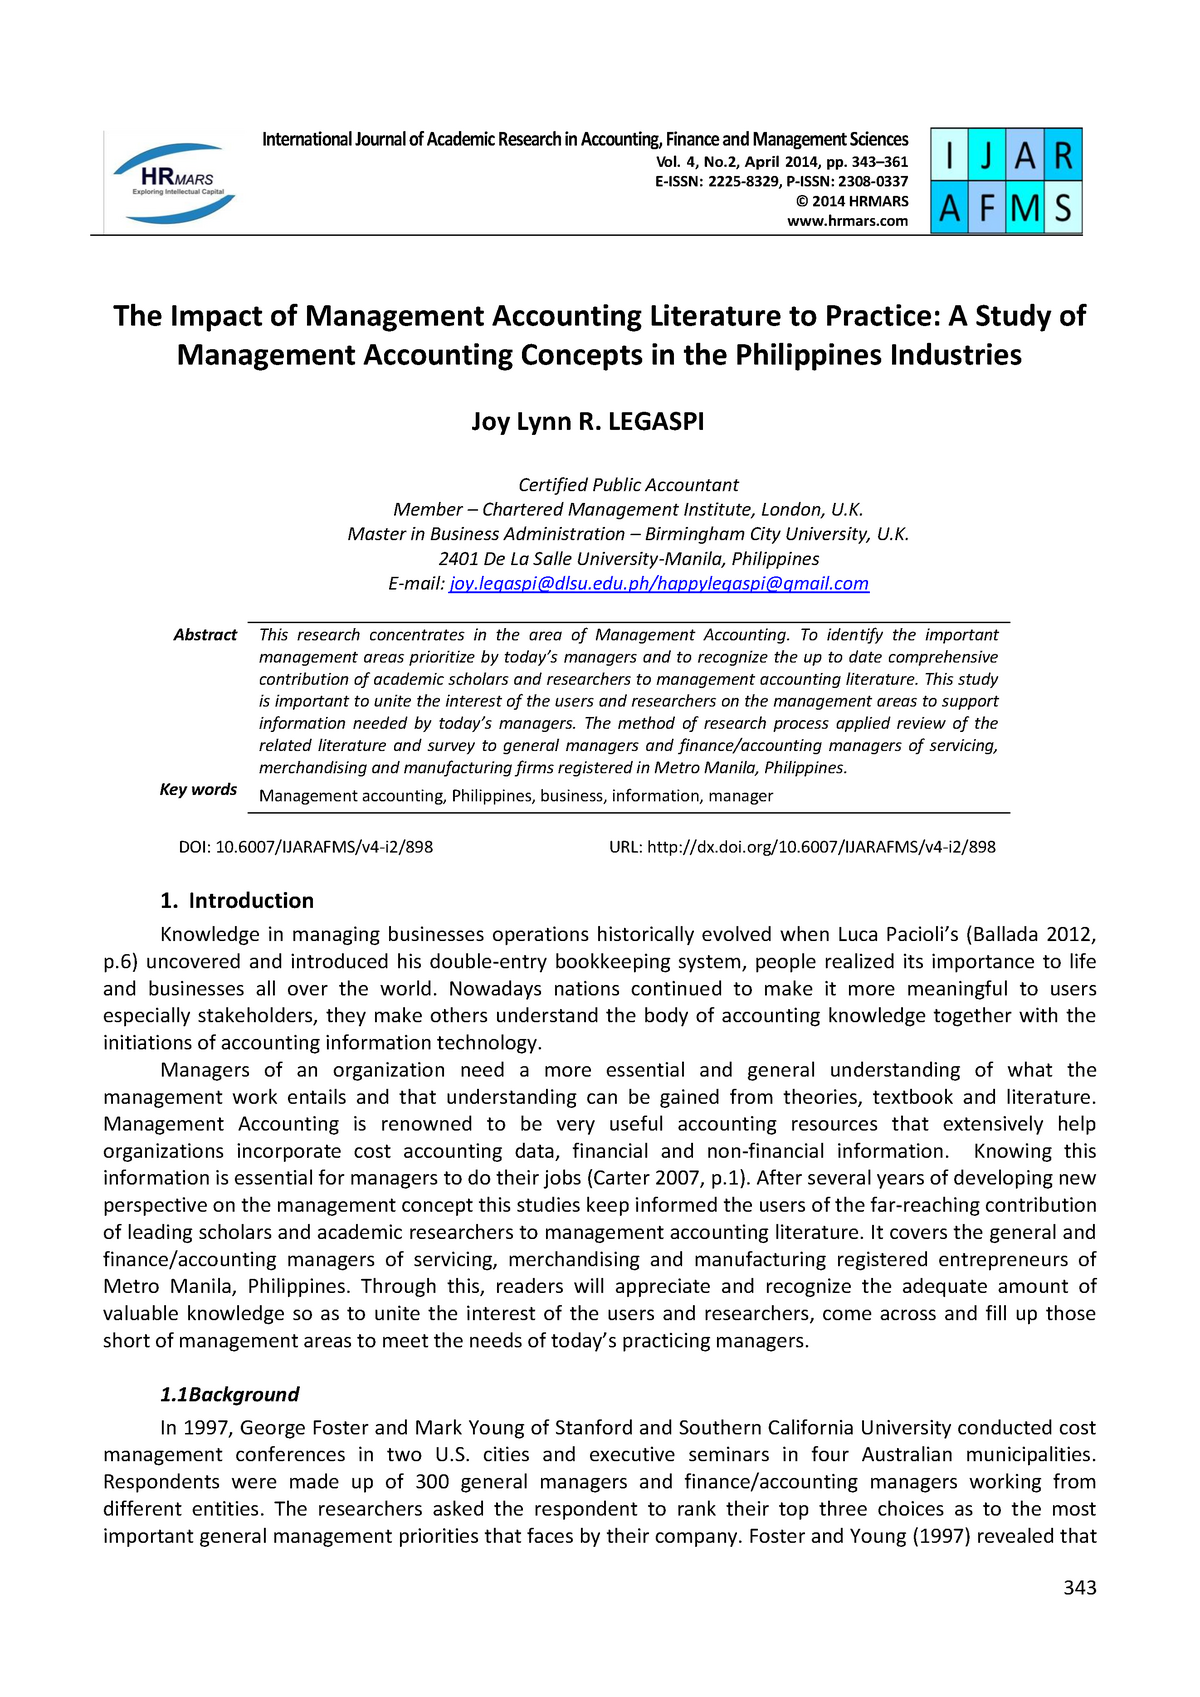 research paper on management accounting